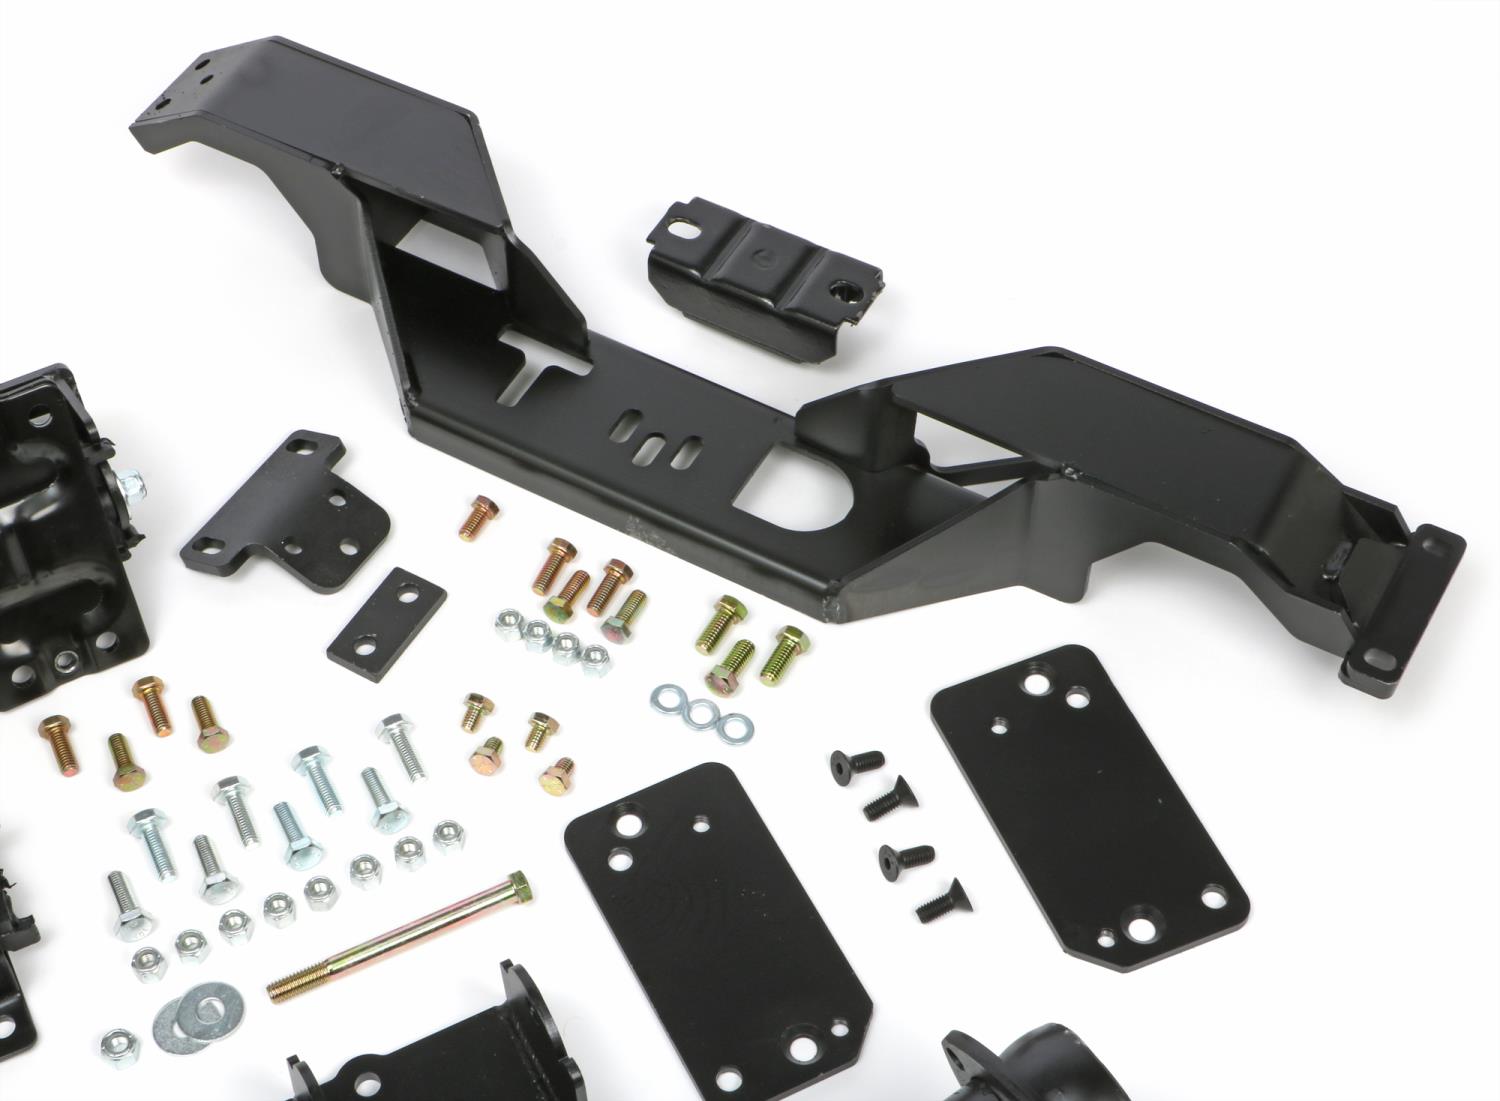 42011 Swap-In-A-Box Kit for GM Gen III/IV LS Engine and Automatic Transmission, 1967-1969 GM F-Body, 1968-1974 GM X-Body